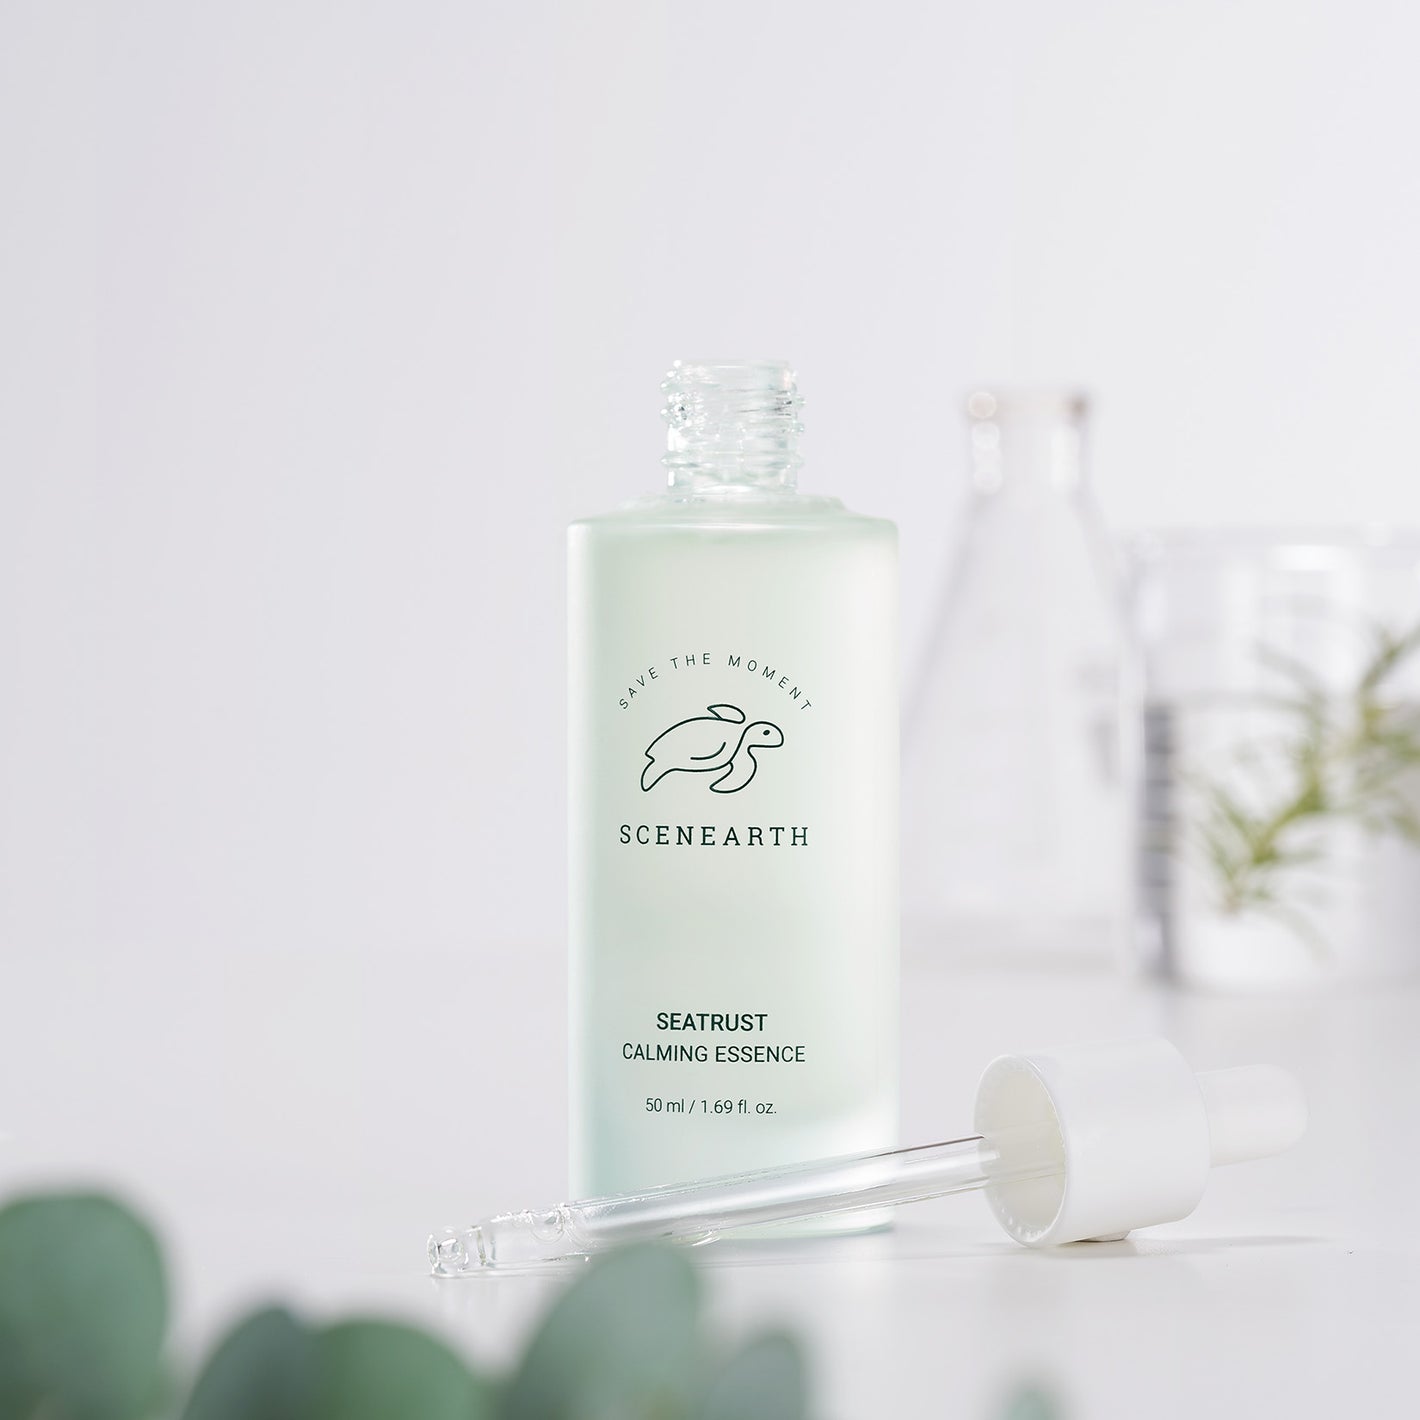 Scenearth Seatrust Calming Essence product in front of a blurry background of beakers full of water and botanicals